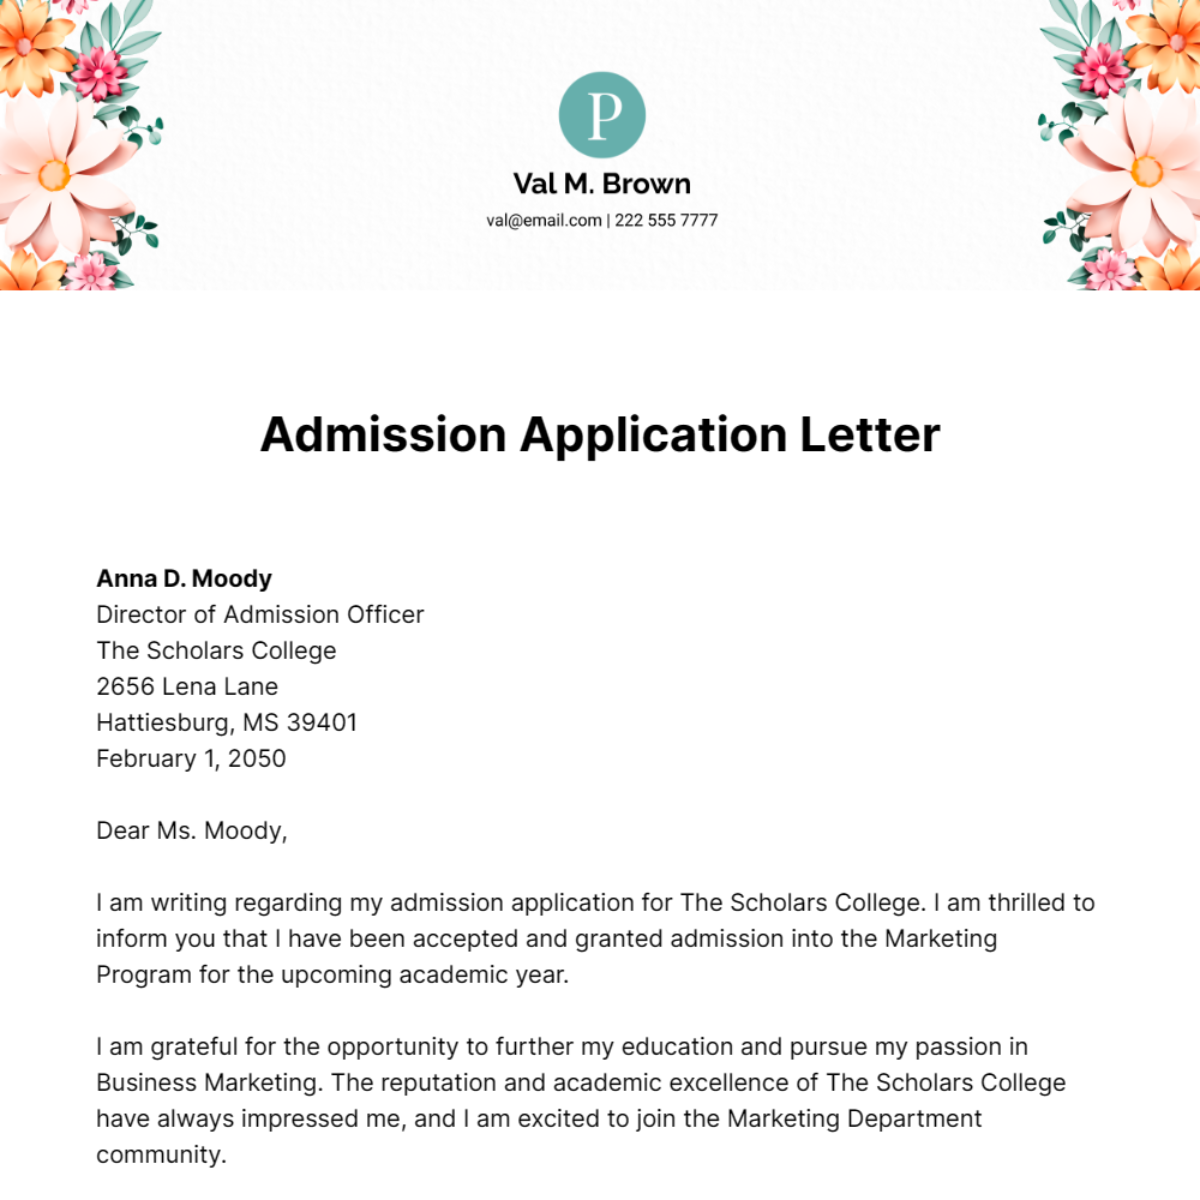 application letter to school for admission